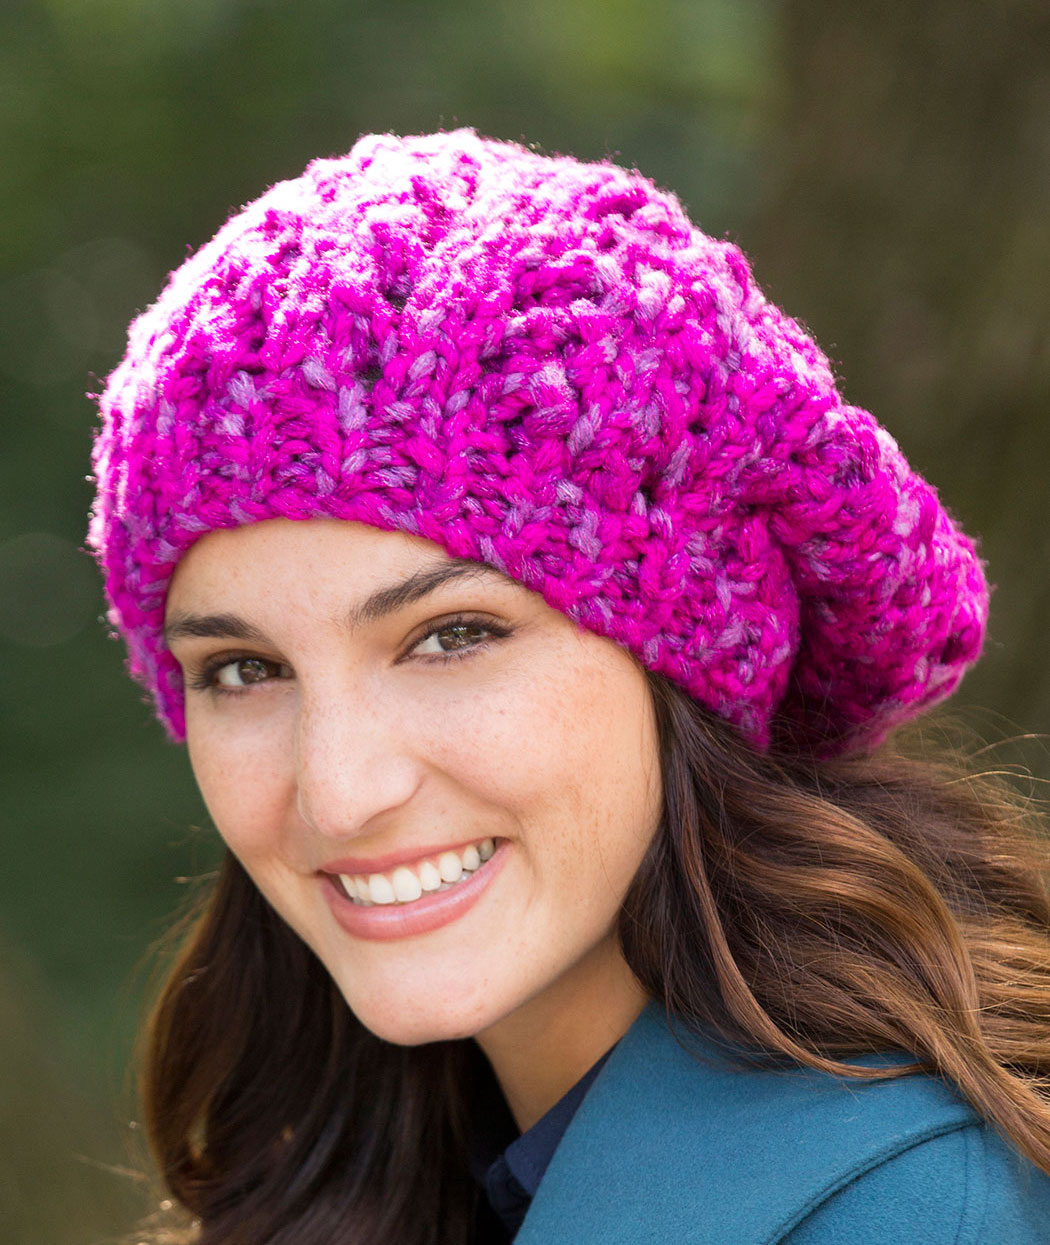 Knitted Hats Patterns 5 Knit Hat Patterns For Women The Funky Stitch